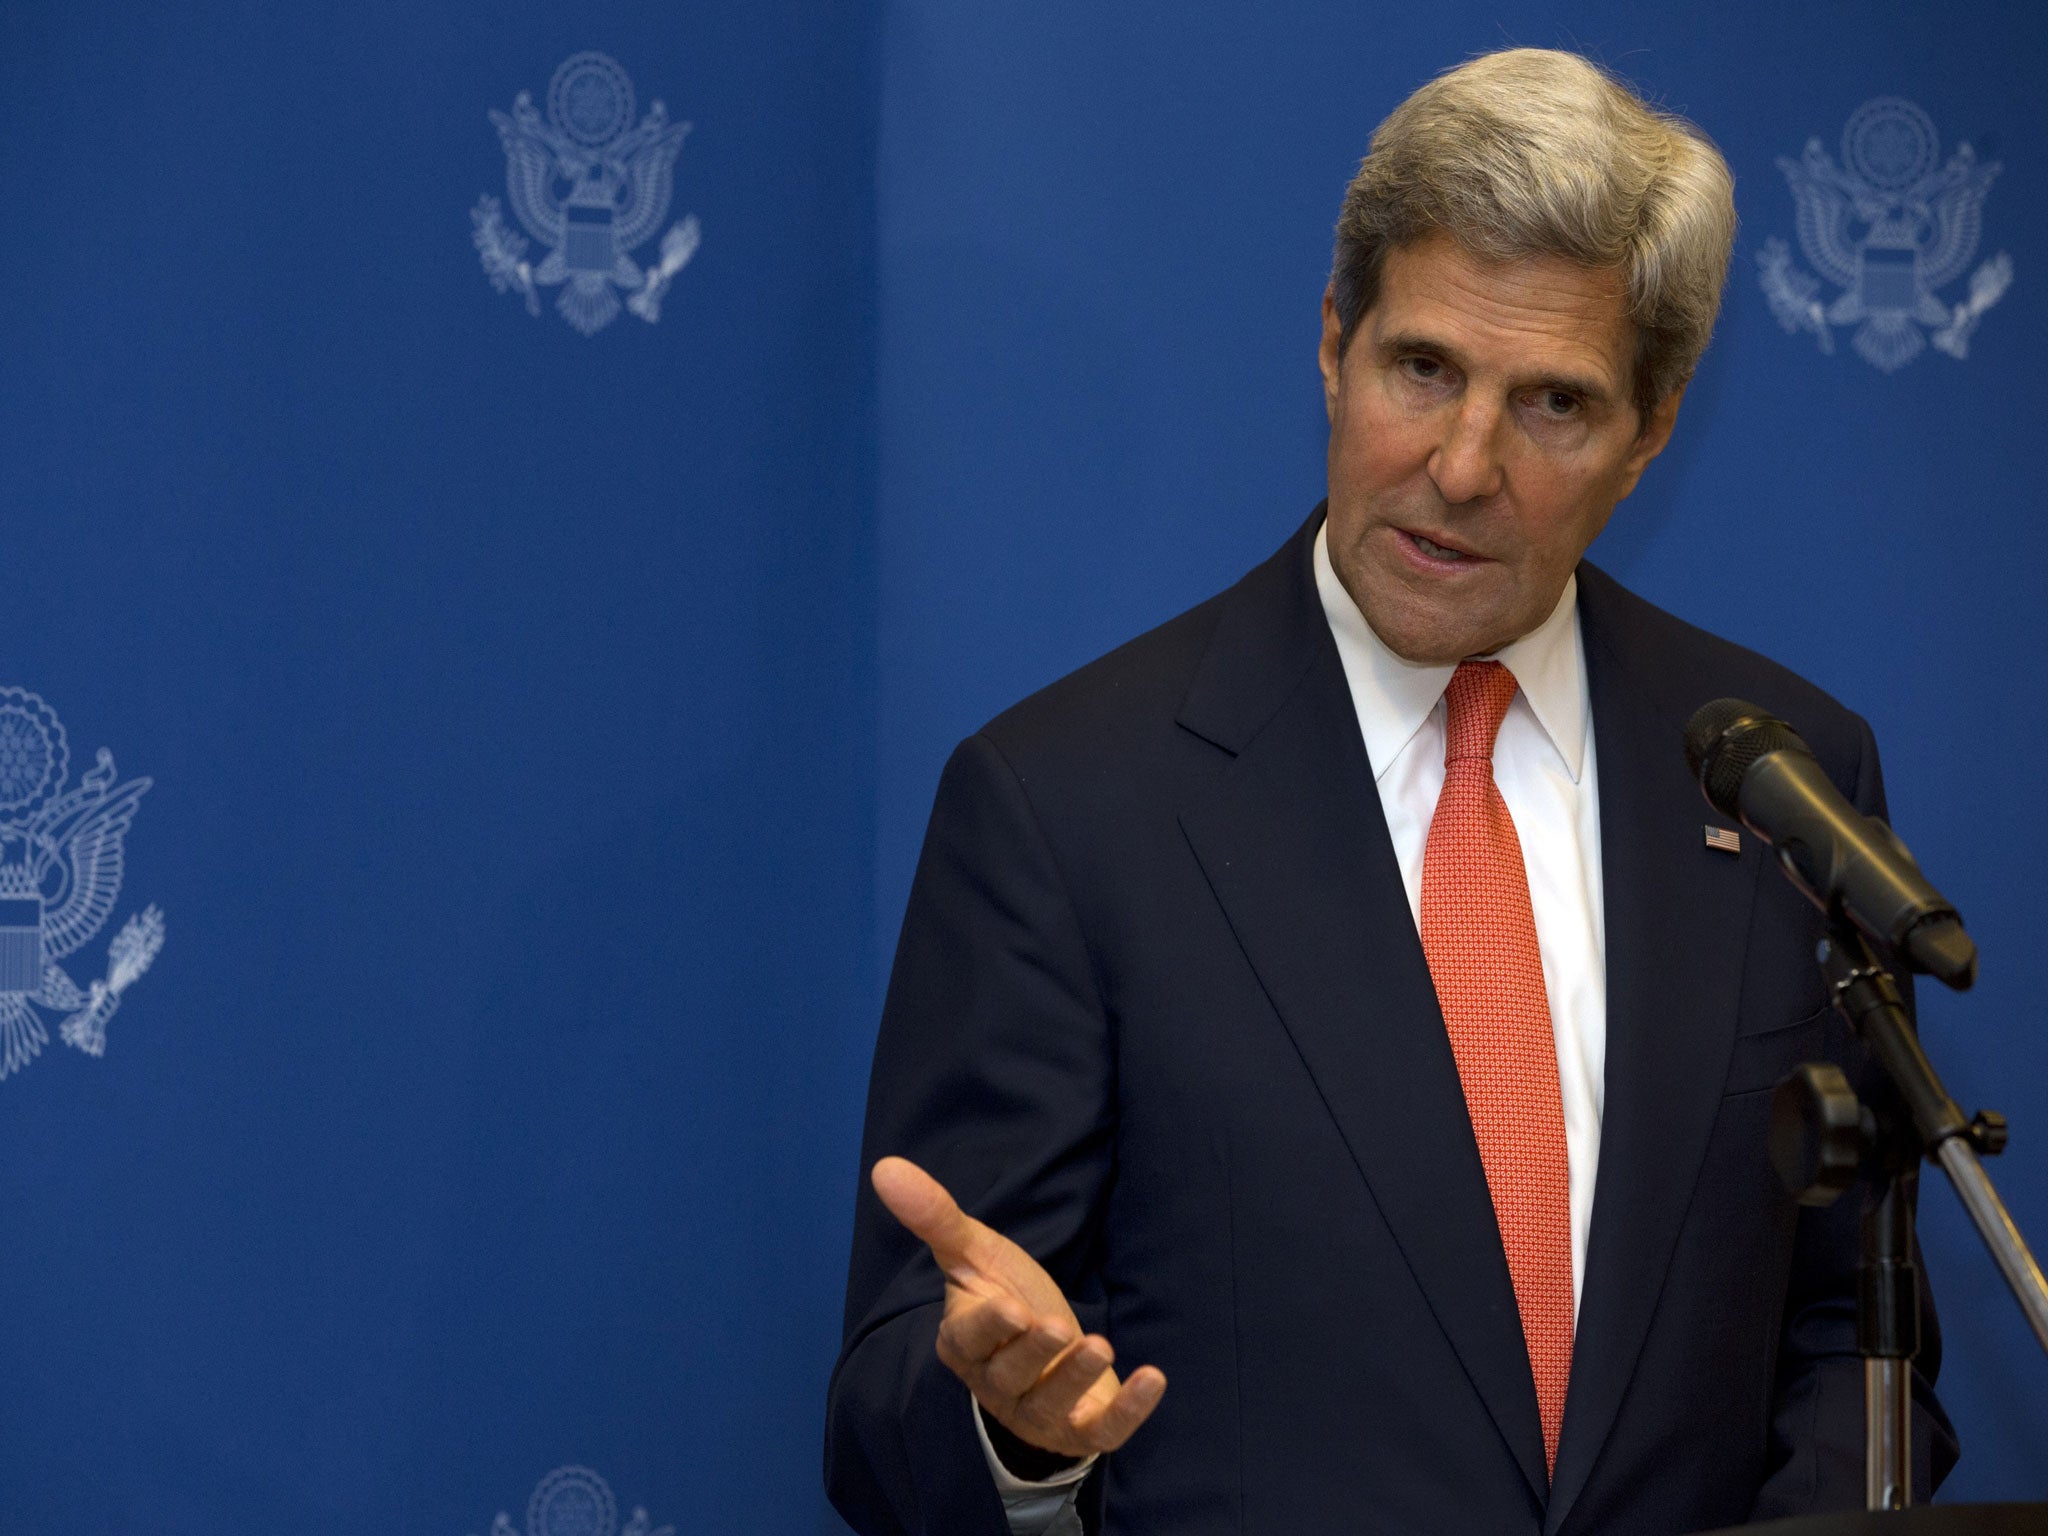 John Kerry spoke to the media in Kuala Lumpur, and explained that Washington's suspension of military hardware deliveries to Egypt was 'not a withdrawal' of US friendship